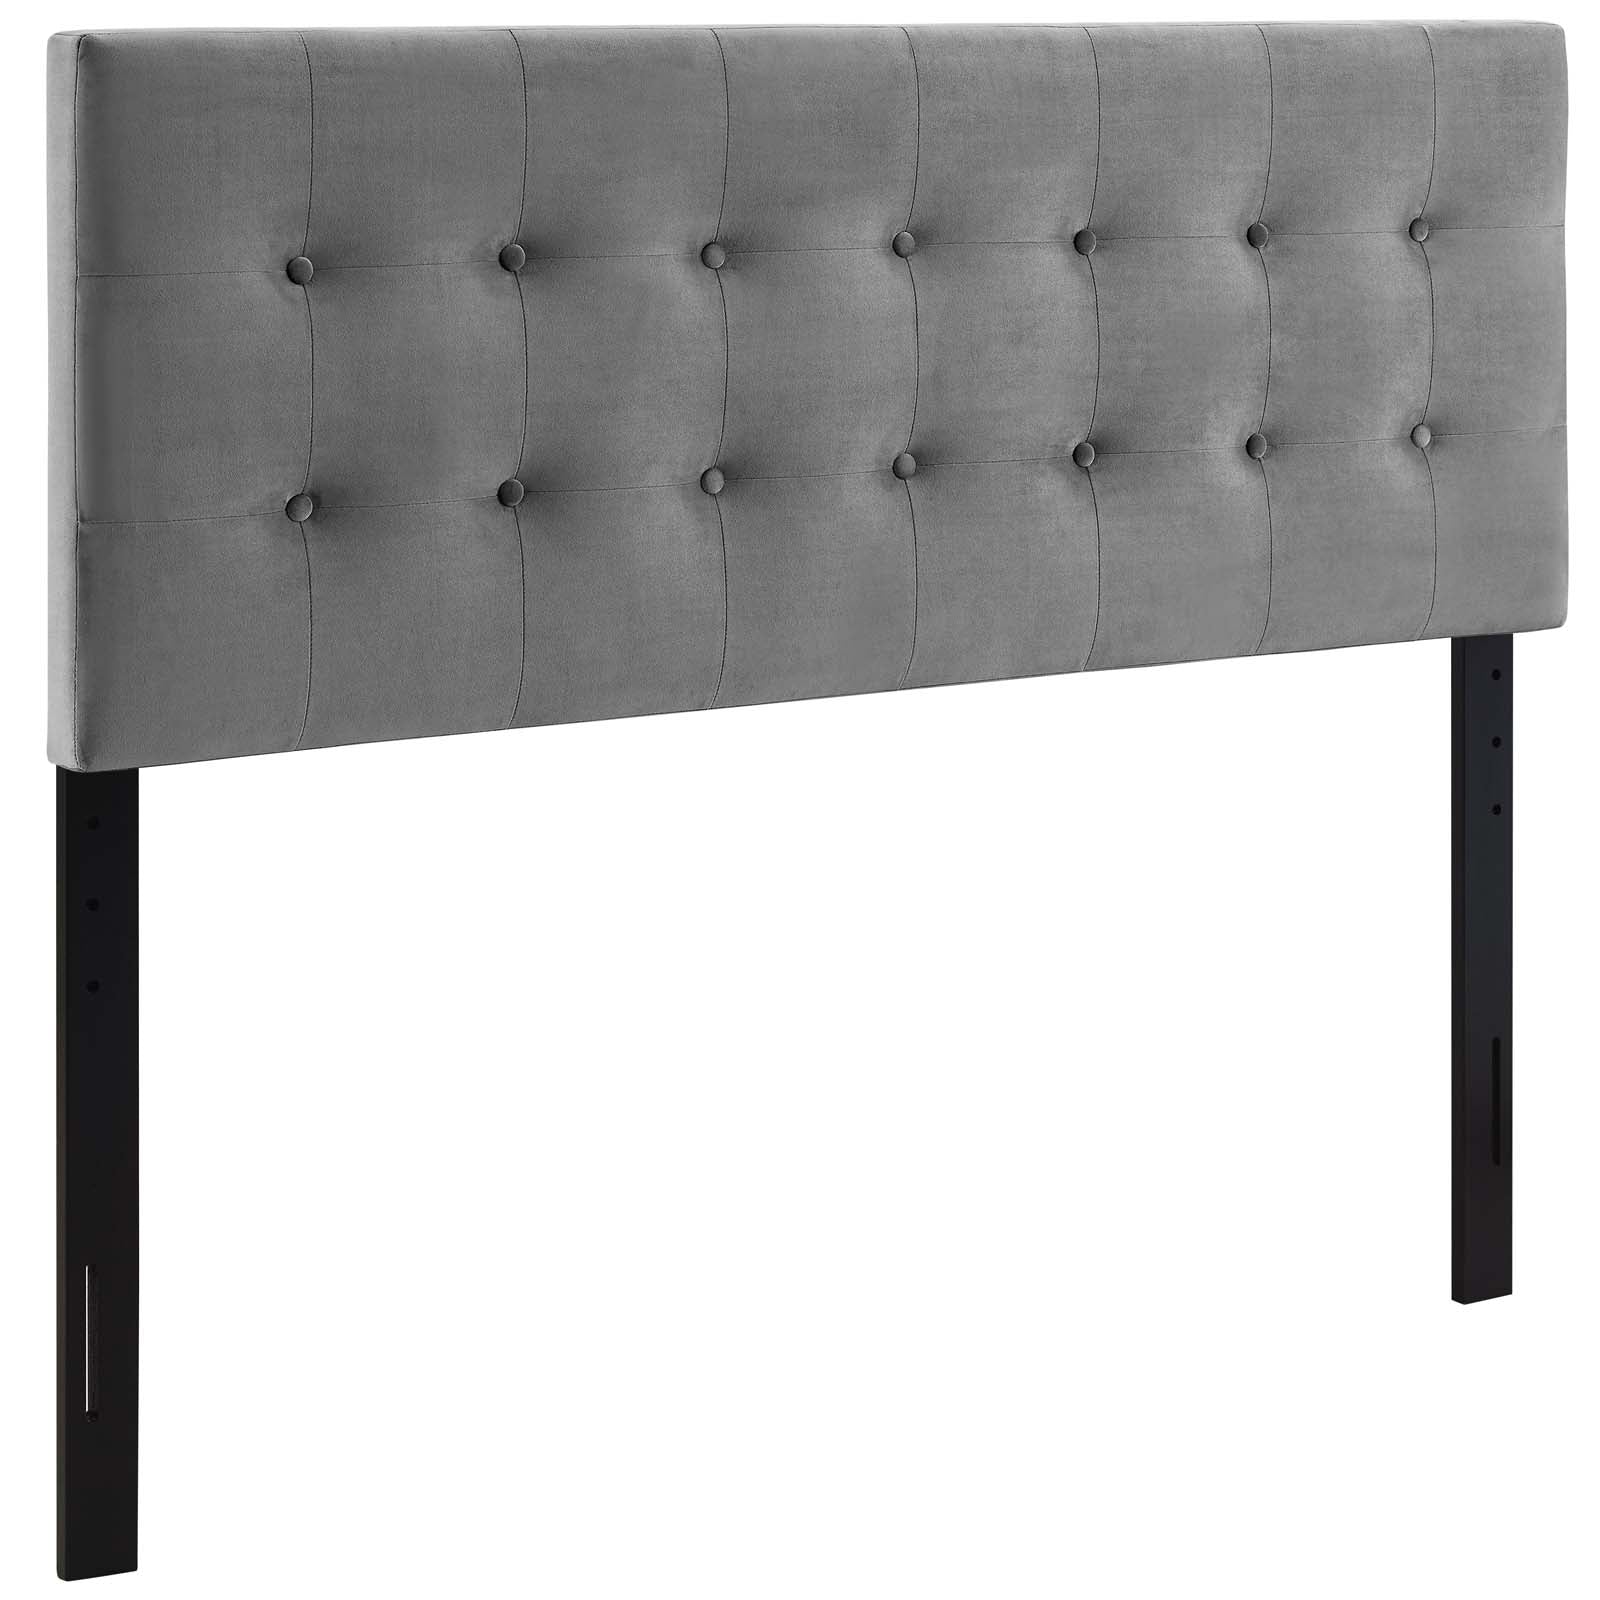 Modway Headboards - Emily King Biscuit Tufted Performance Velvet Headboard Gray